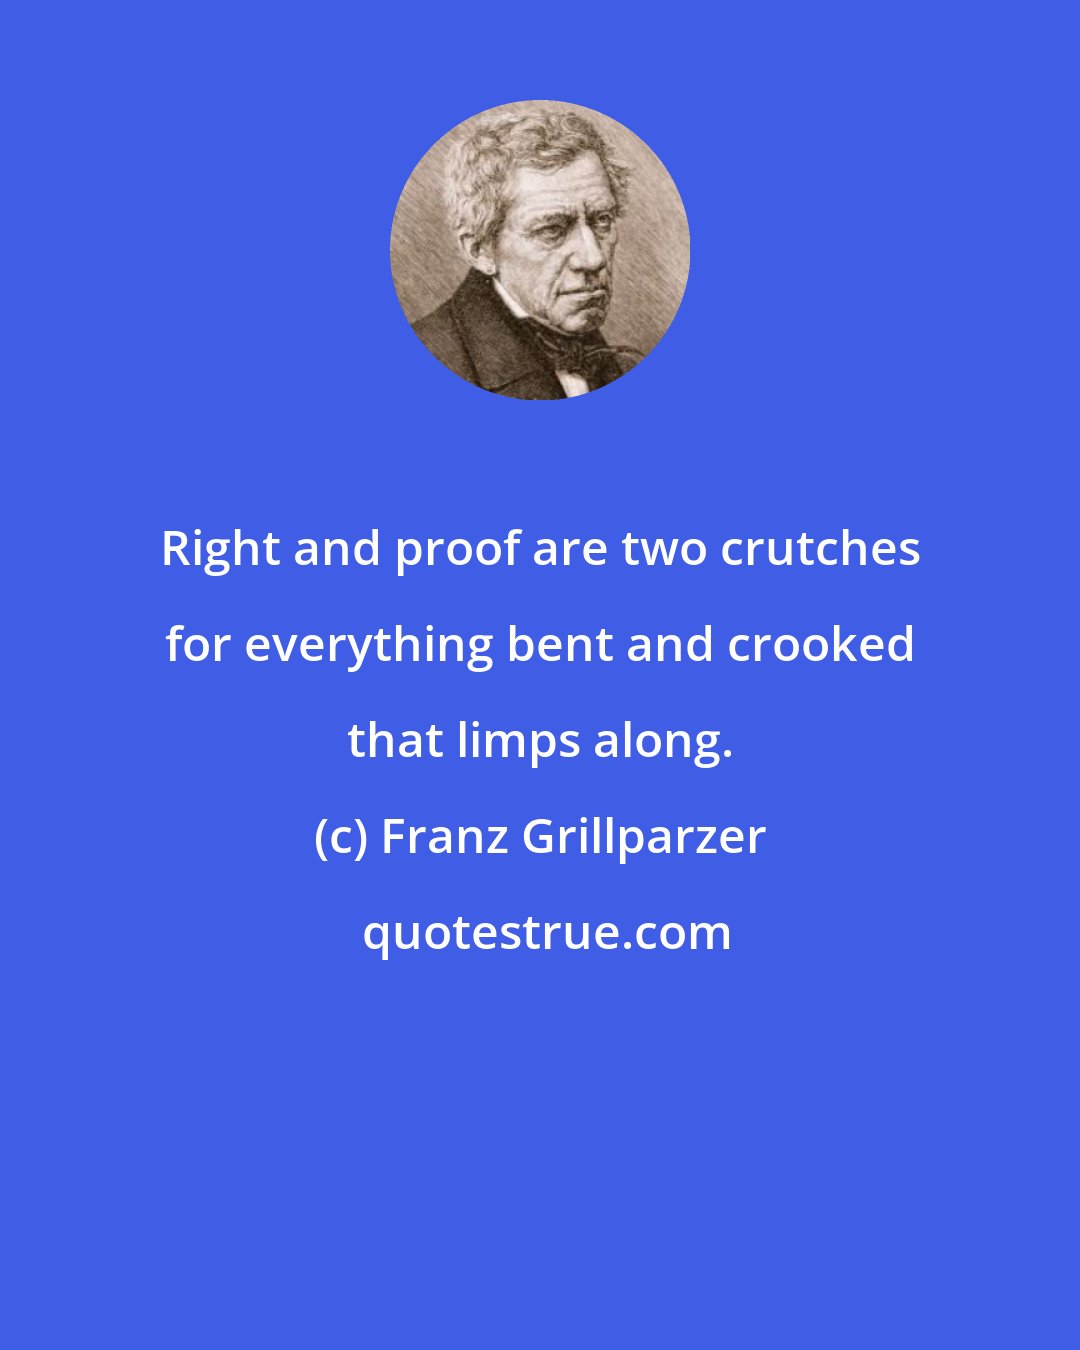 Franz Grillparzer: Right and proof are two crutches for everything bent and crooked that limps along.